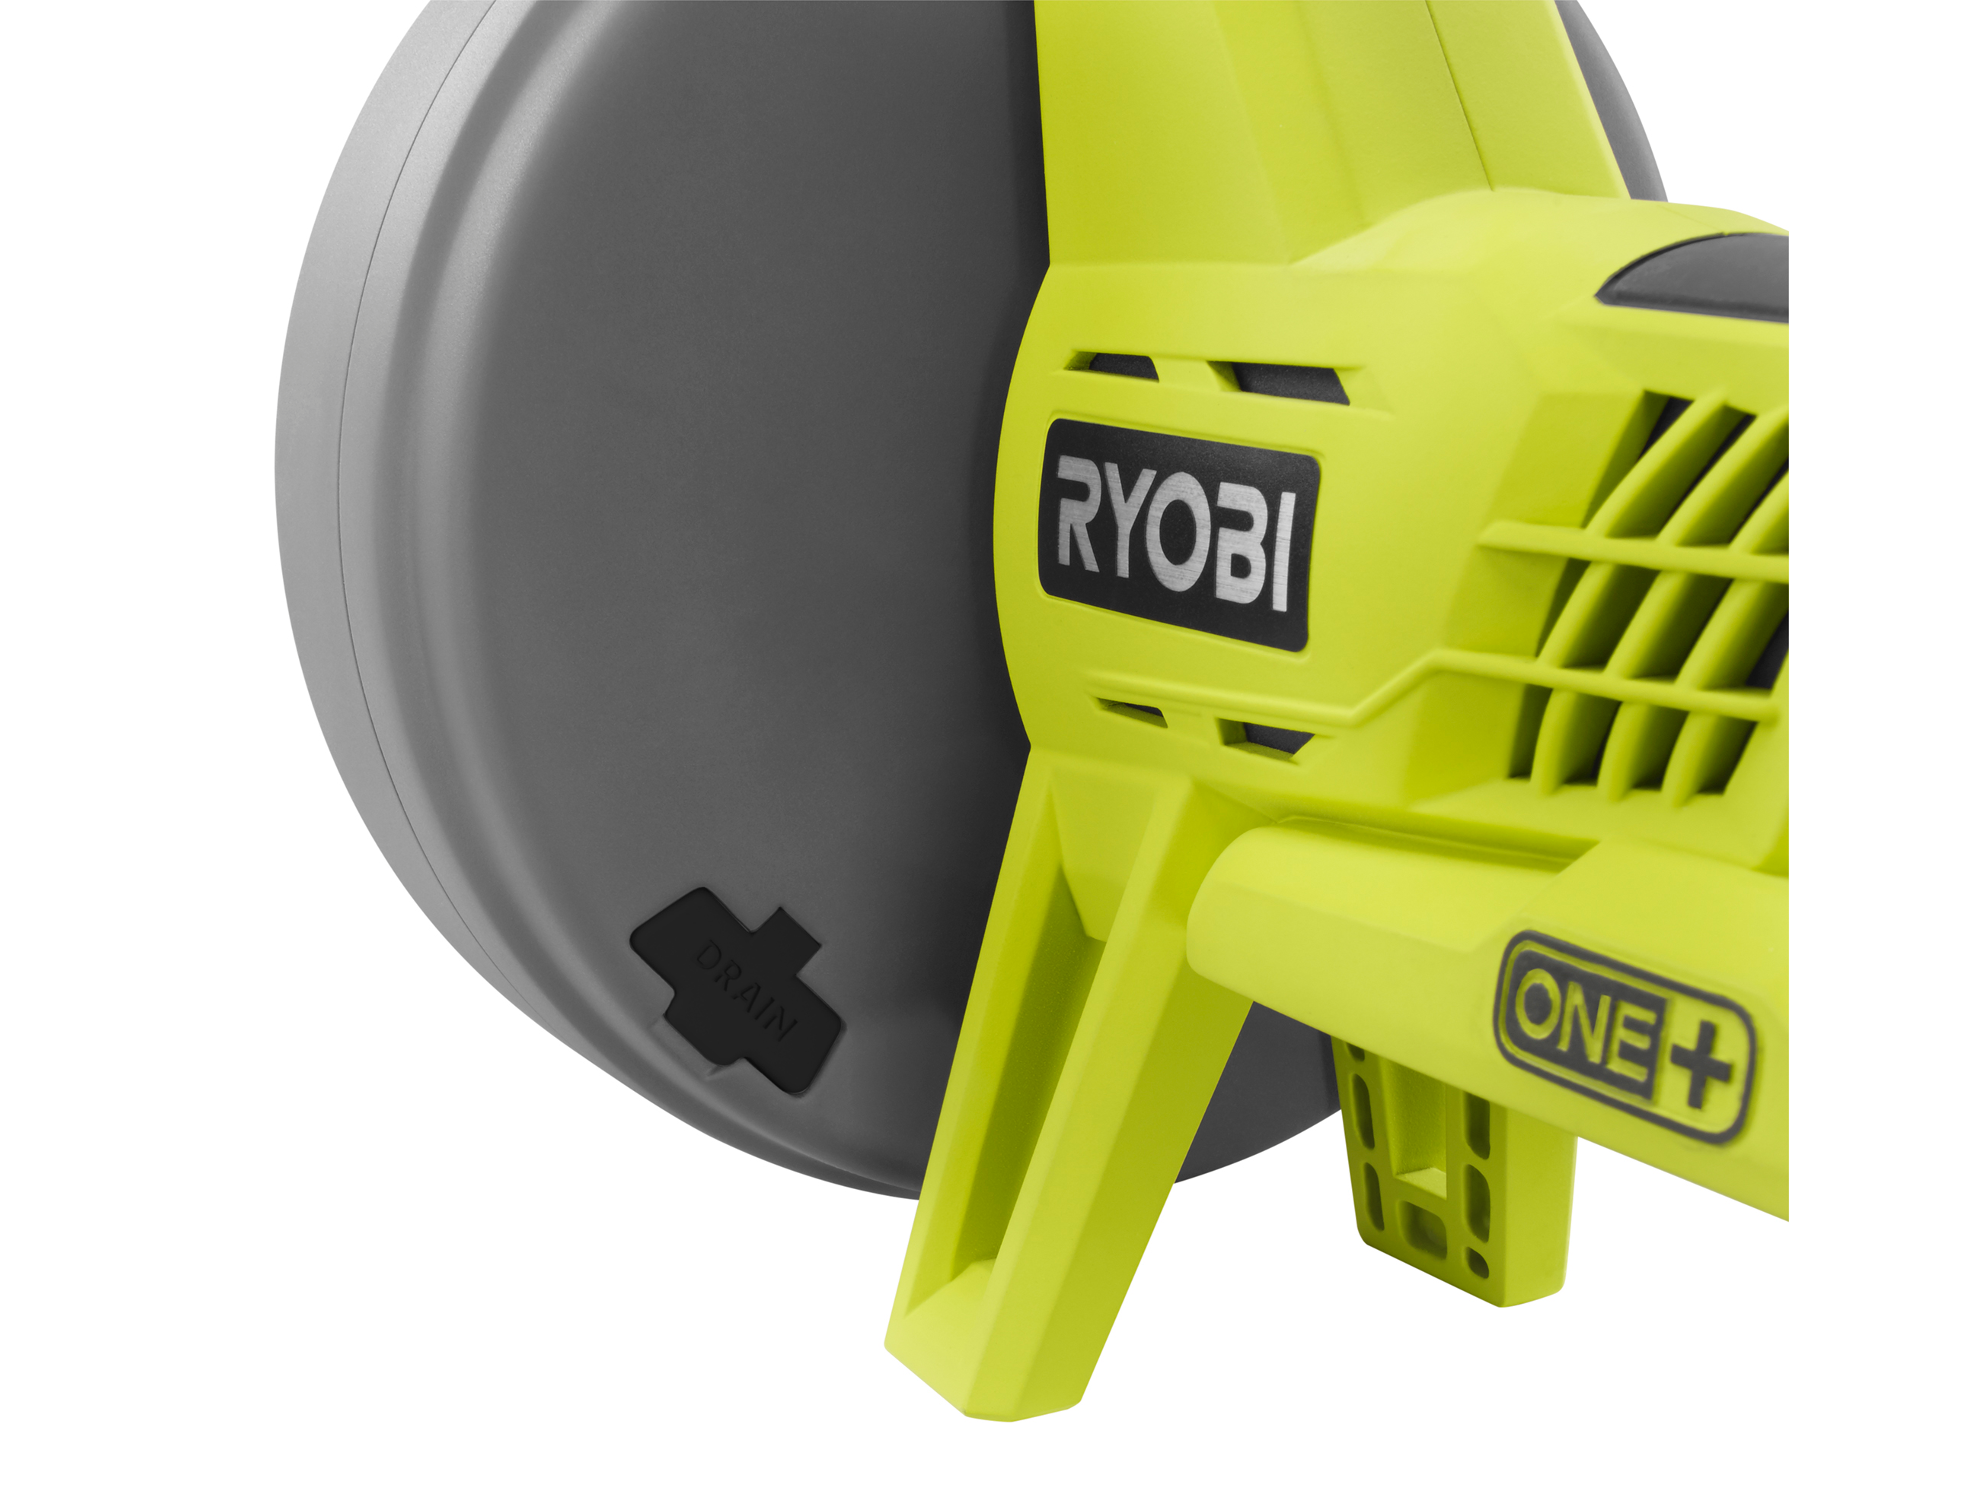 Clear Clogged Tub & Sink Drains Combo New Ryobi P4001 18-Volt Drain Auger